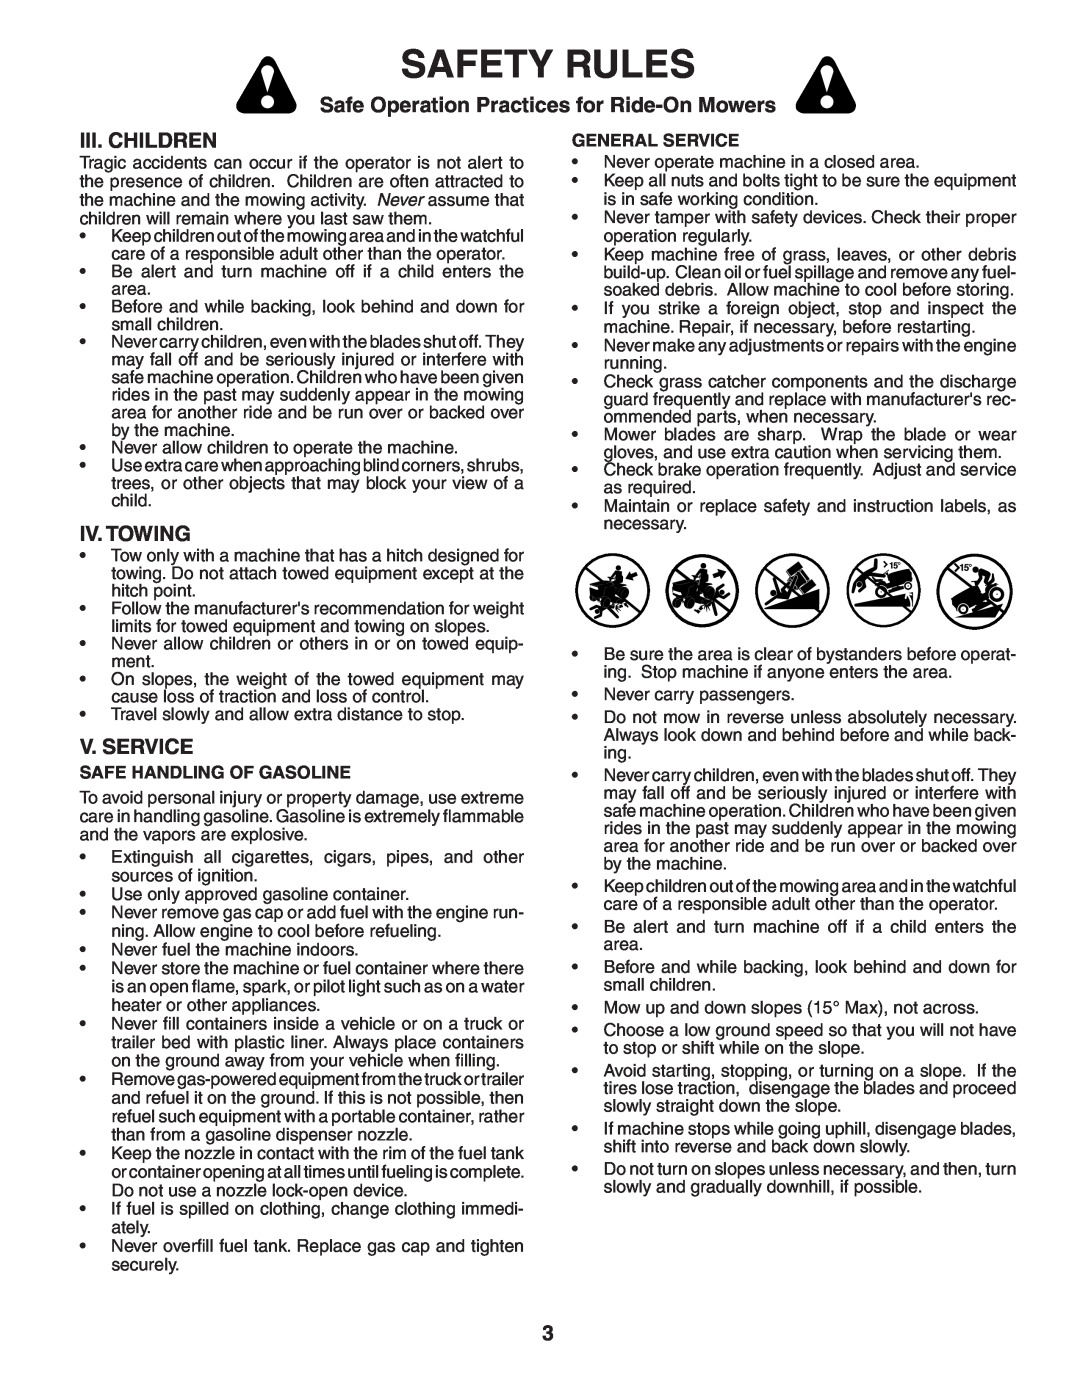 Poulan 402464 manual Iii. Children, Iv. Towing, V. Service, Safety Rules, Safe Operation Practices for Ride-On Mowers 